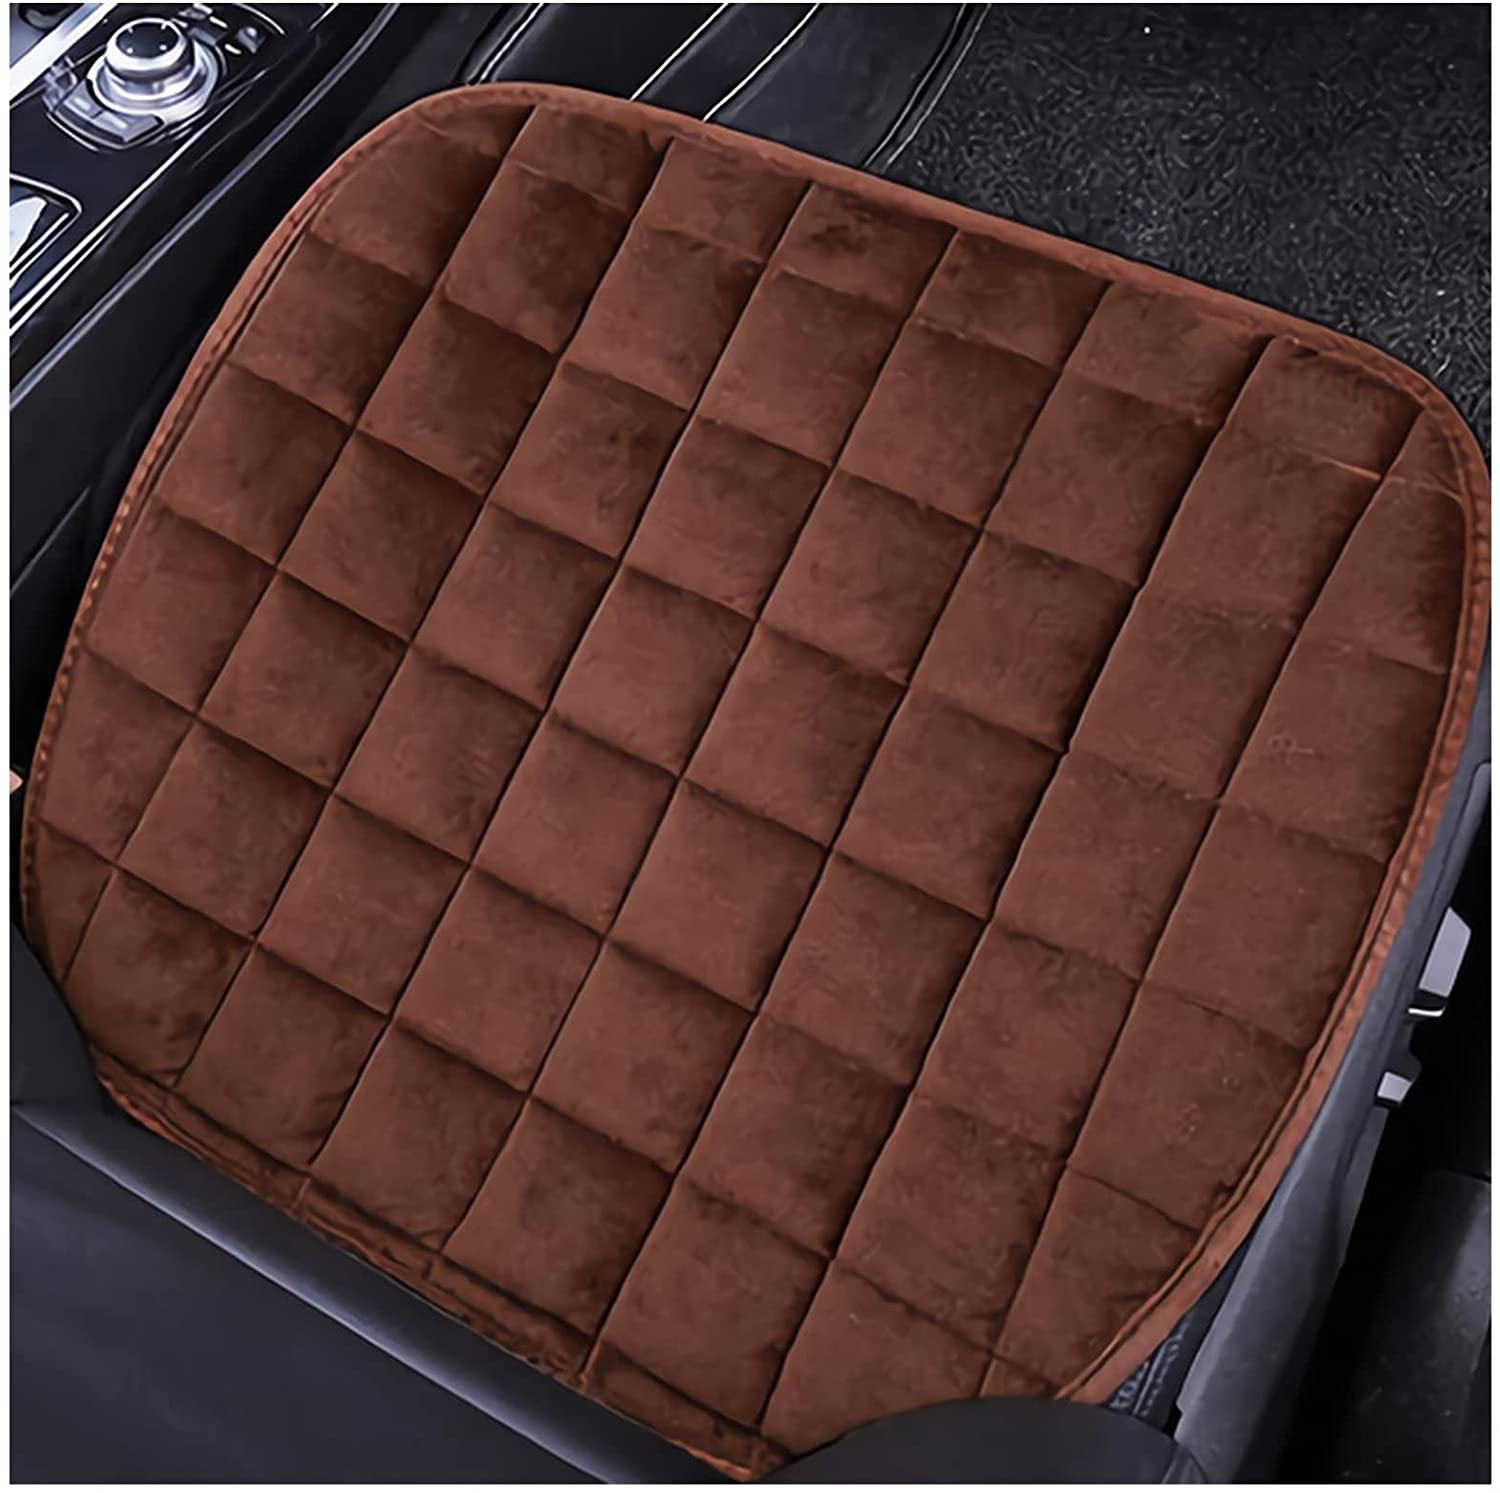 bamutech Seat Cushion Car Seat Cover Fit Truck SUV Van Front Rear Flake Cloth Cushion Non-Slip Winter Car Protector Mat Pad Keep Warm Universal Seat Cushion Chair (Size : Brown Front 1)